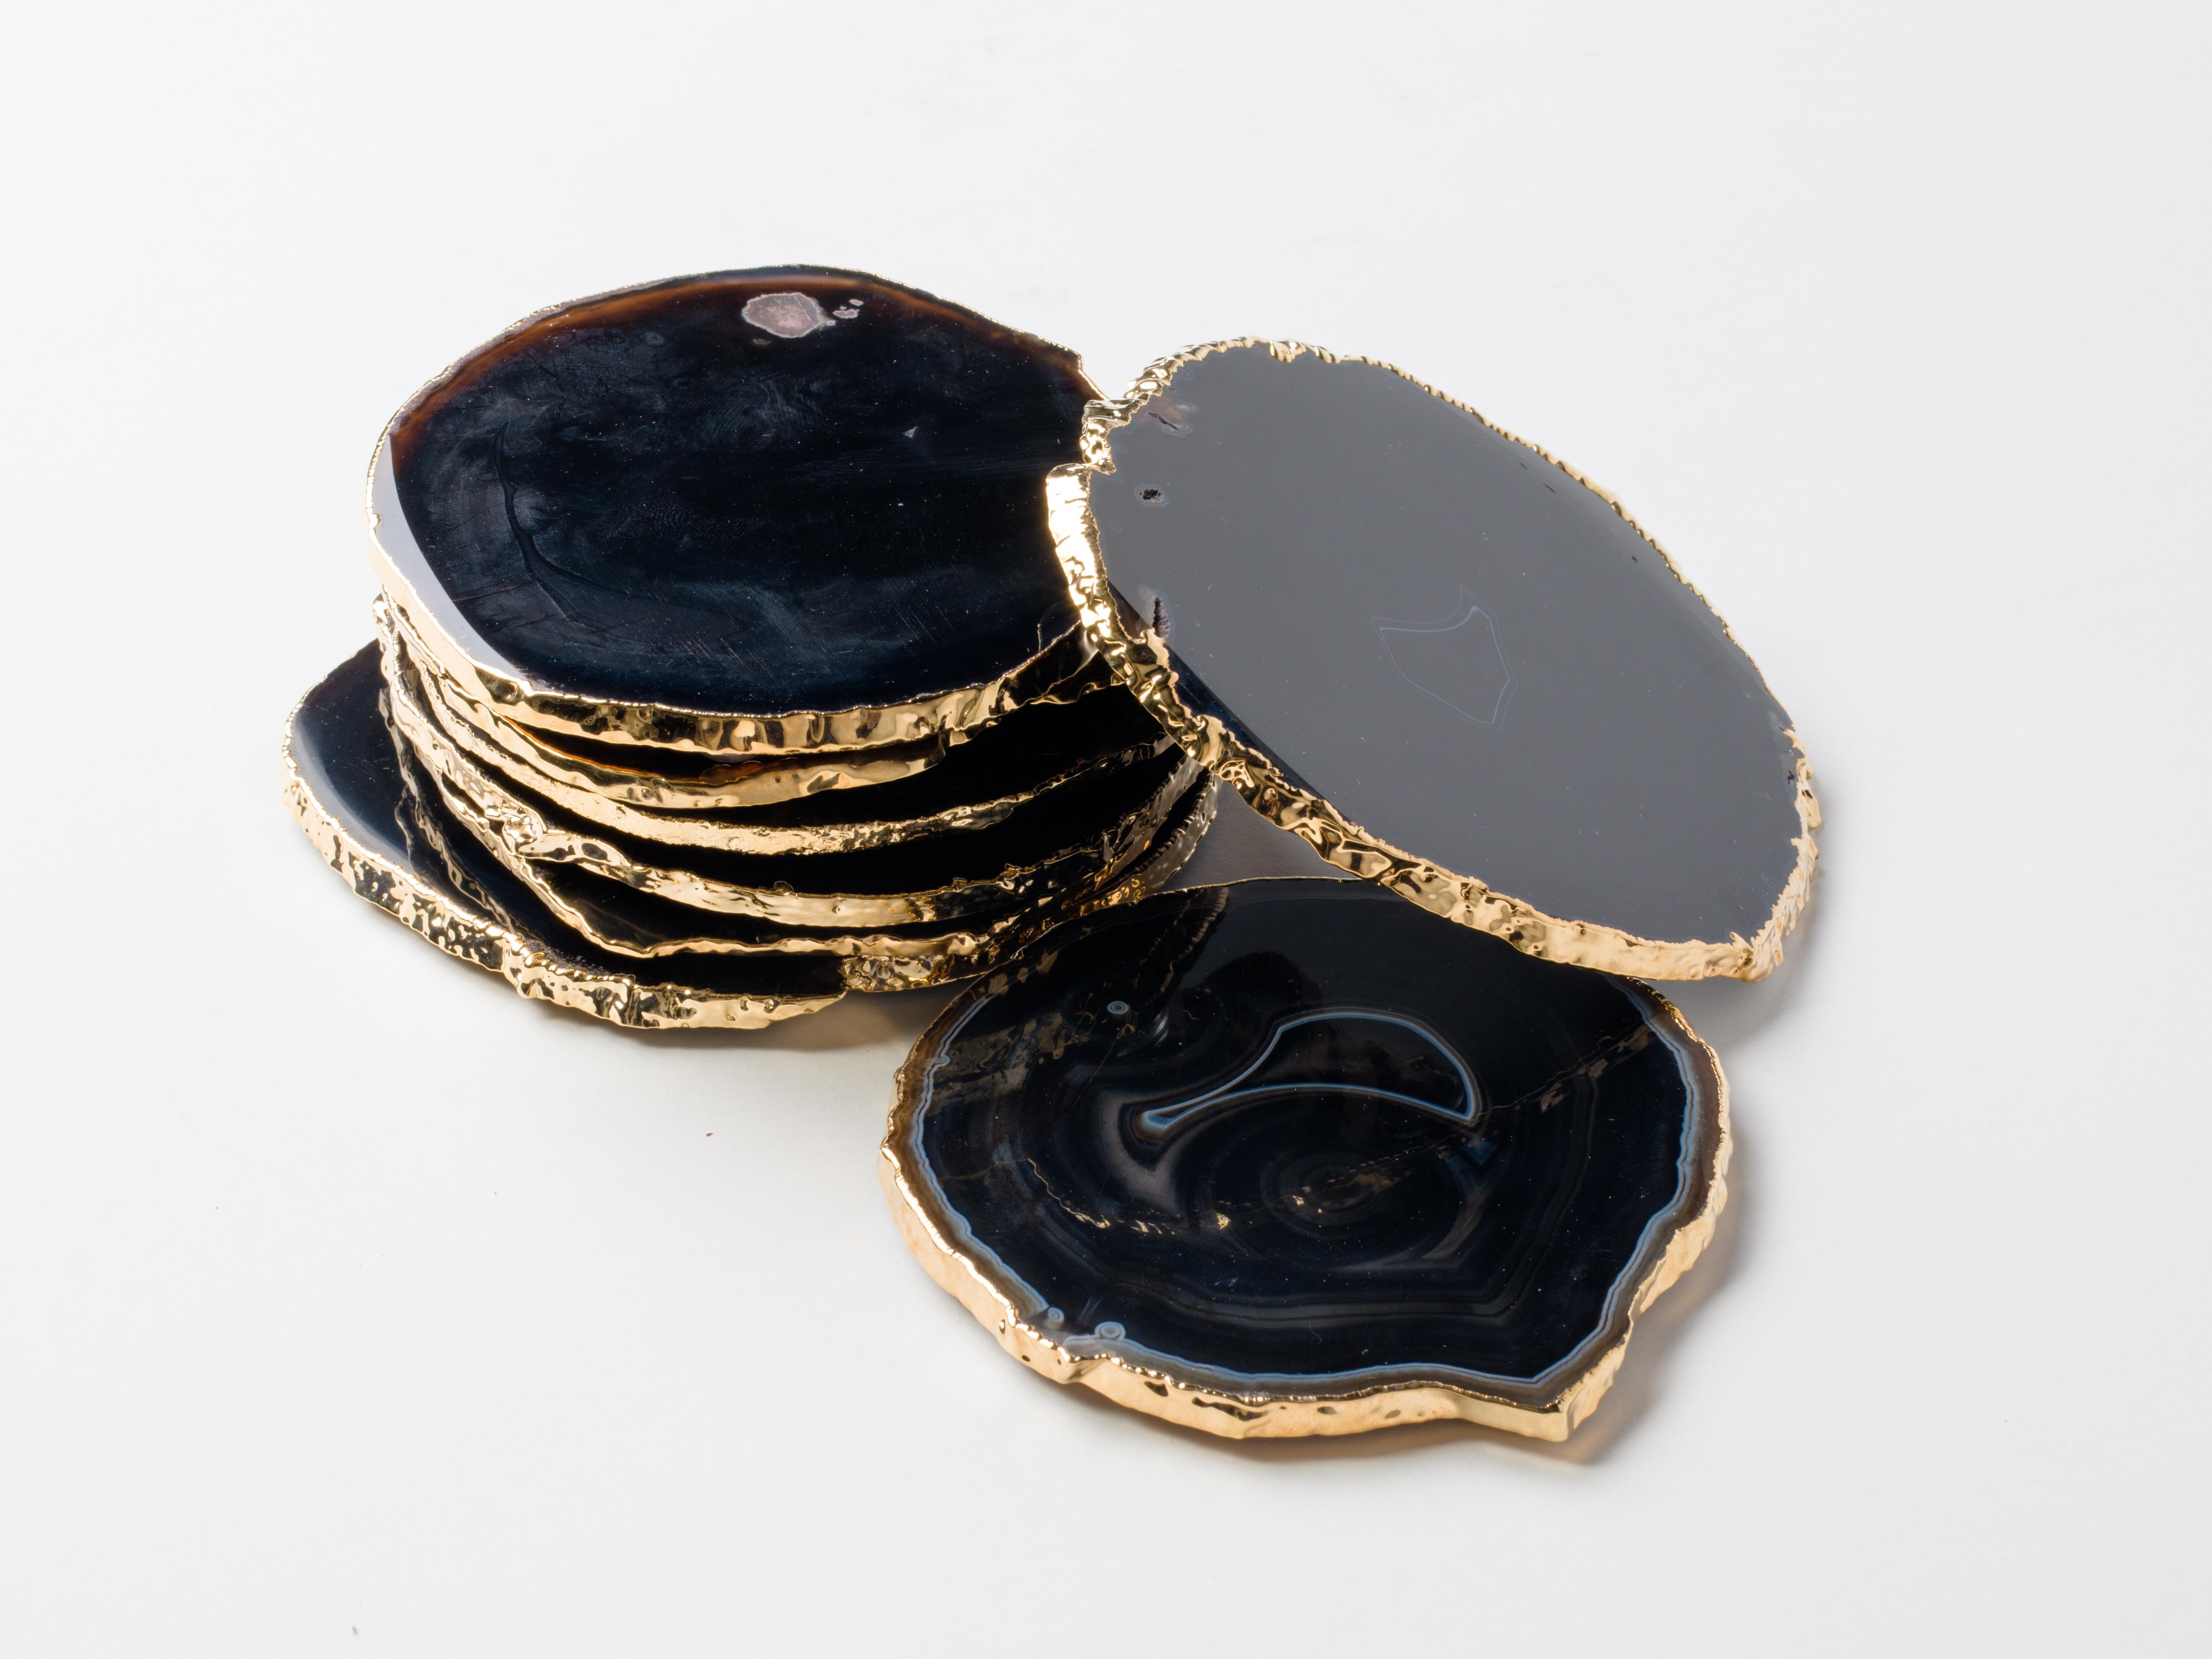 Stunning natural agate and crystal coasters with 24 karat gold plated edges. Polished fronts and natural rough edges. No two pieces are alike. Make beautiful accessories to any coffee table or dining table setting. Three color variations are